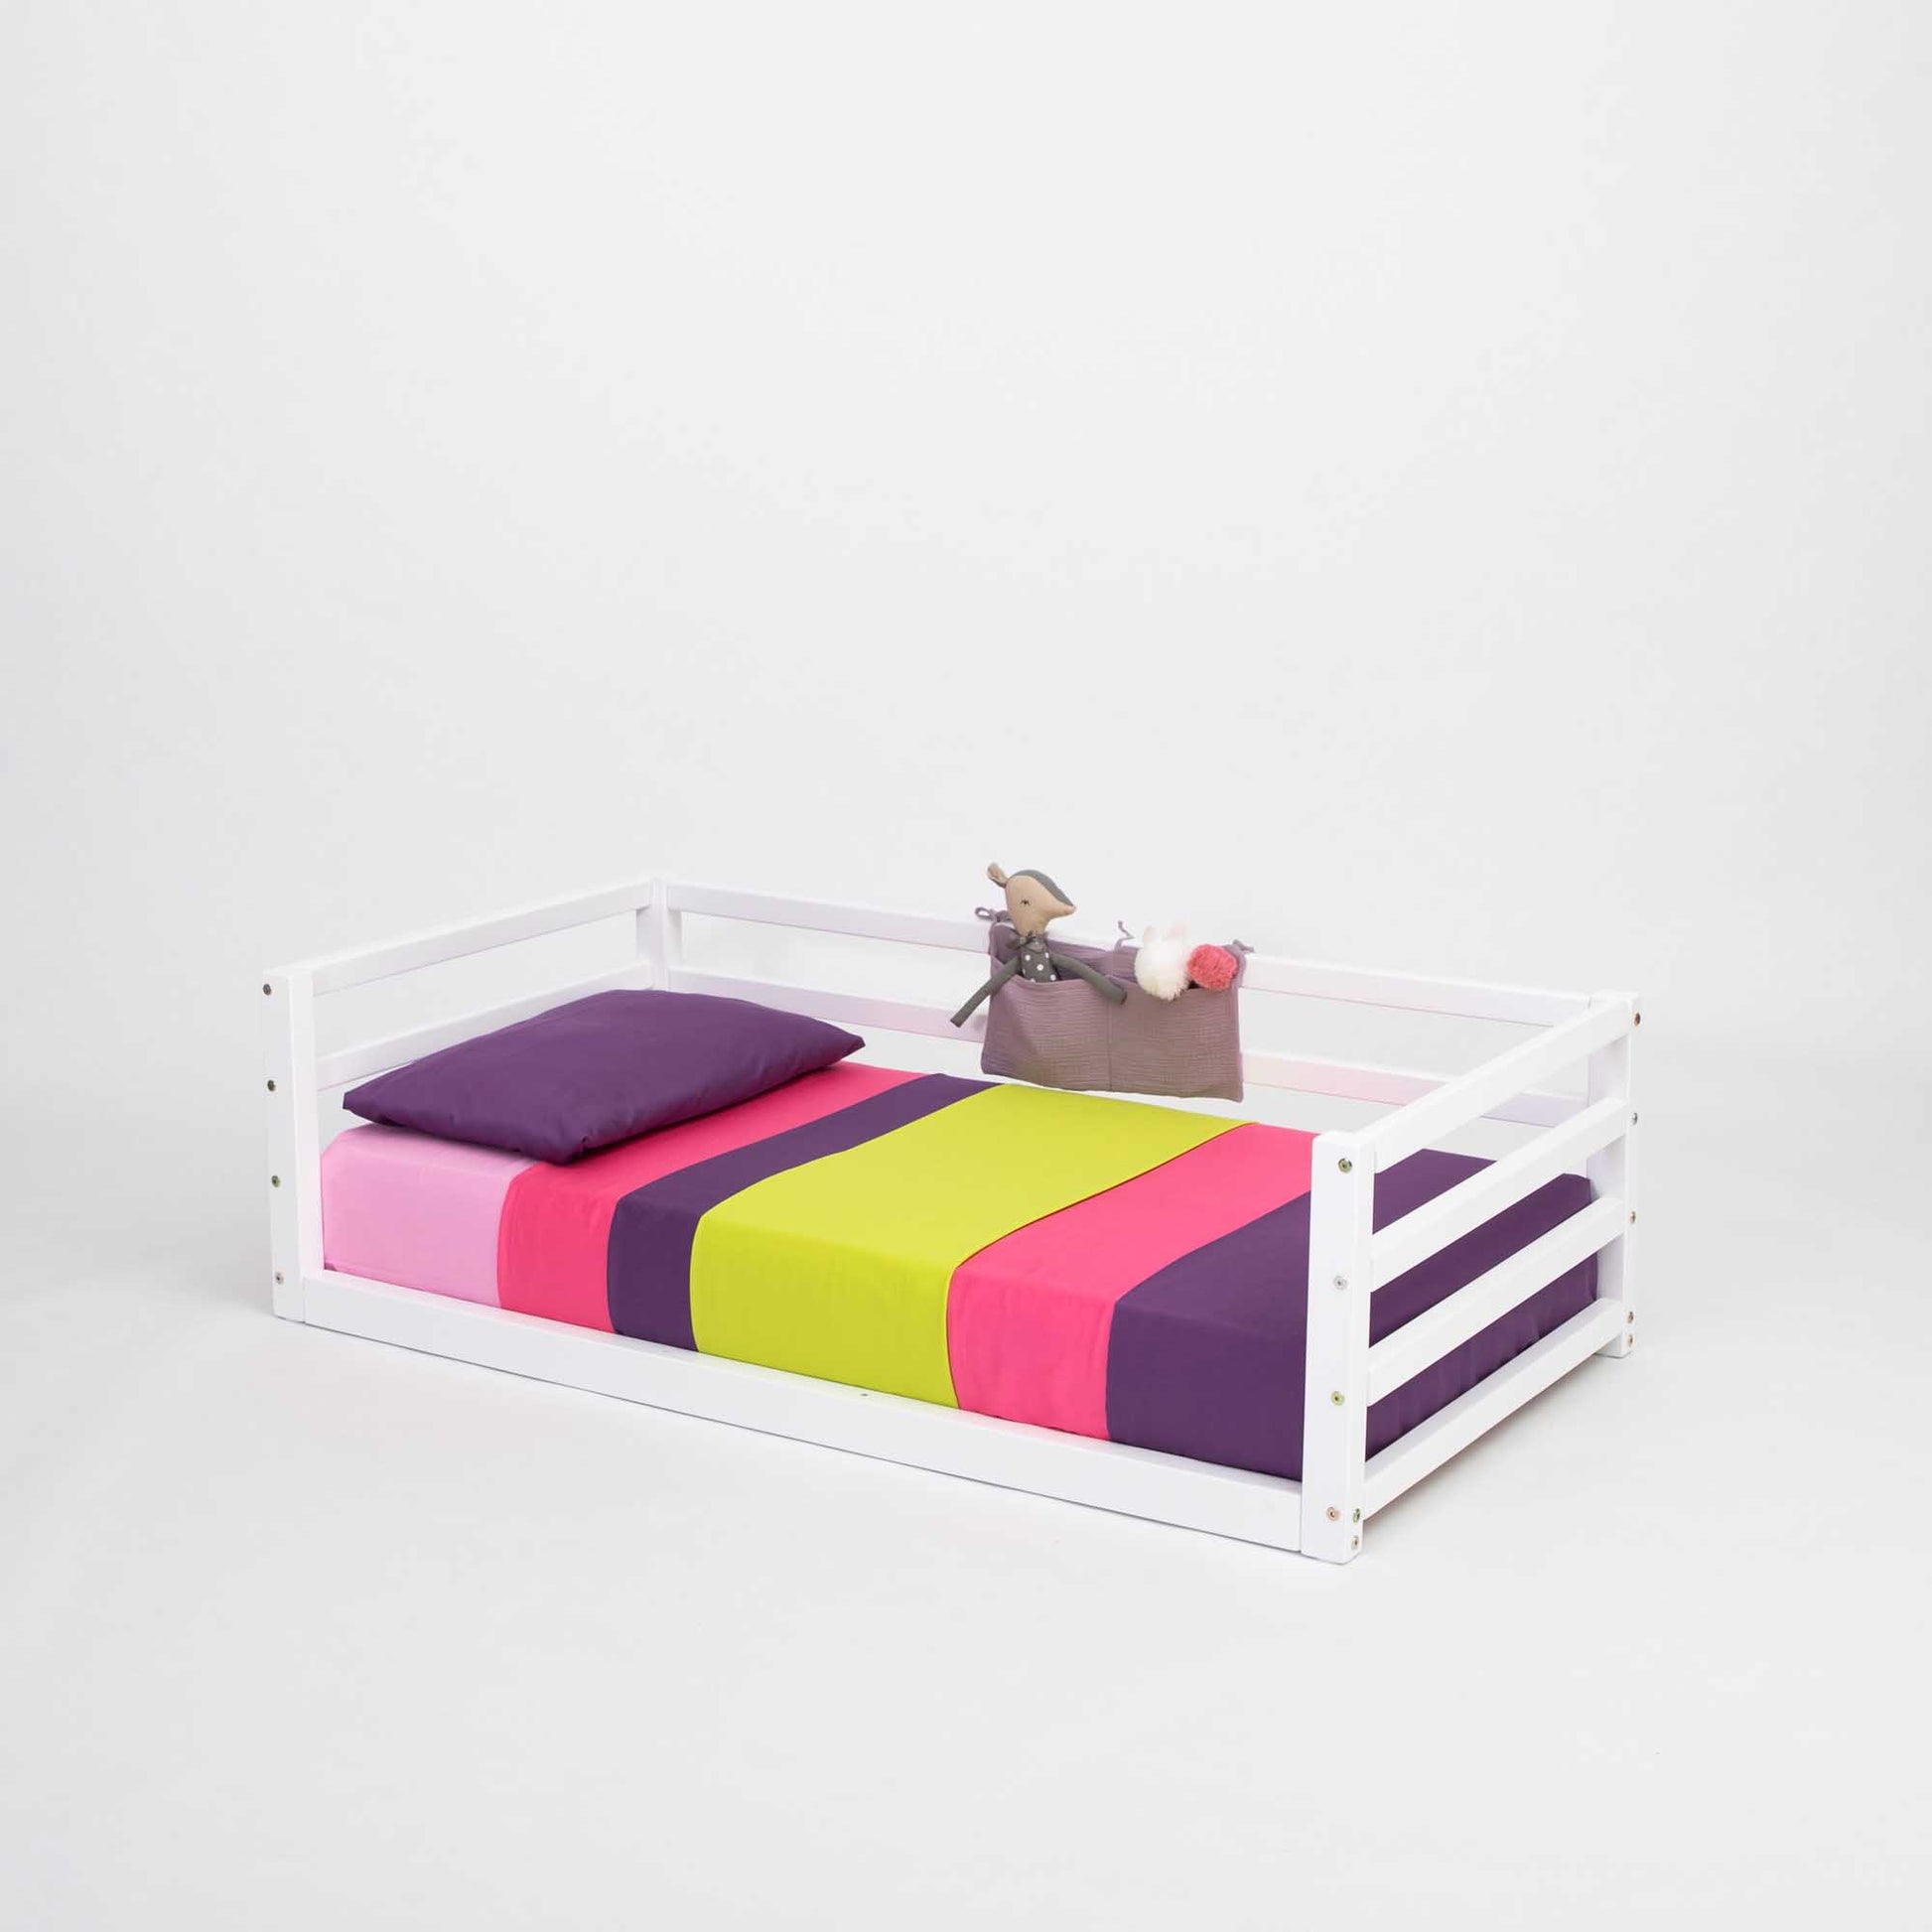 A Children's floor level bed with 3-sided safety rail by Sweet Home From Wood, with colorful sheets and a white frame, perfect for a toddler.